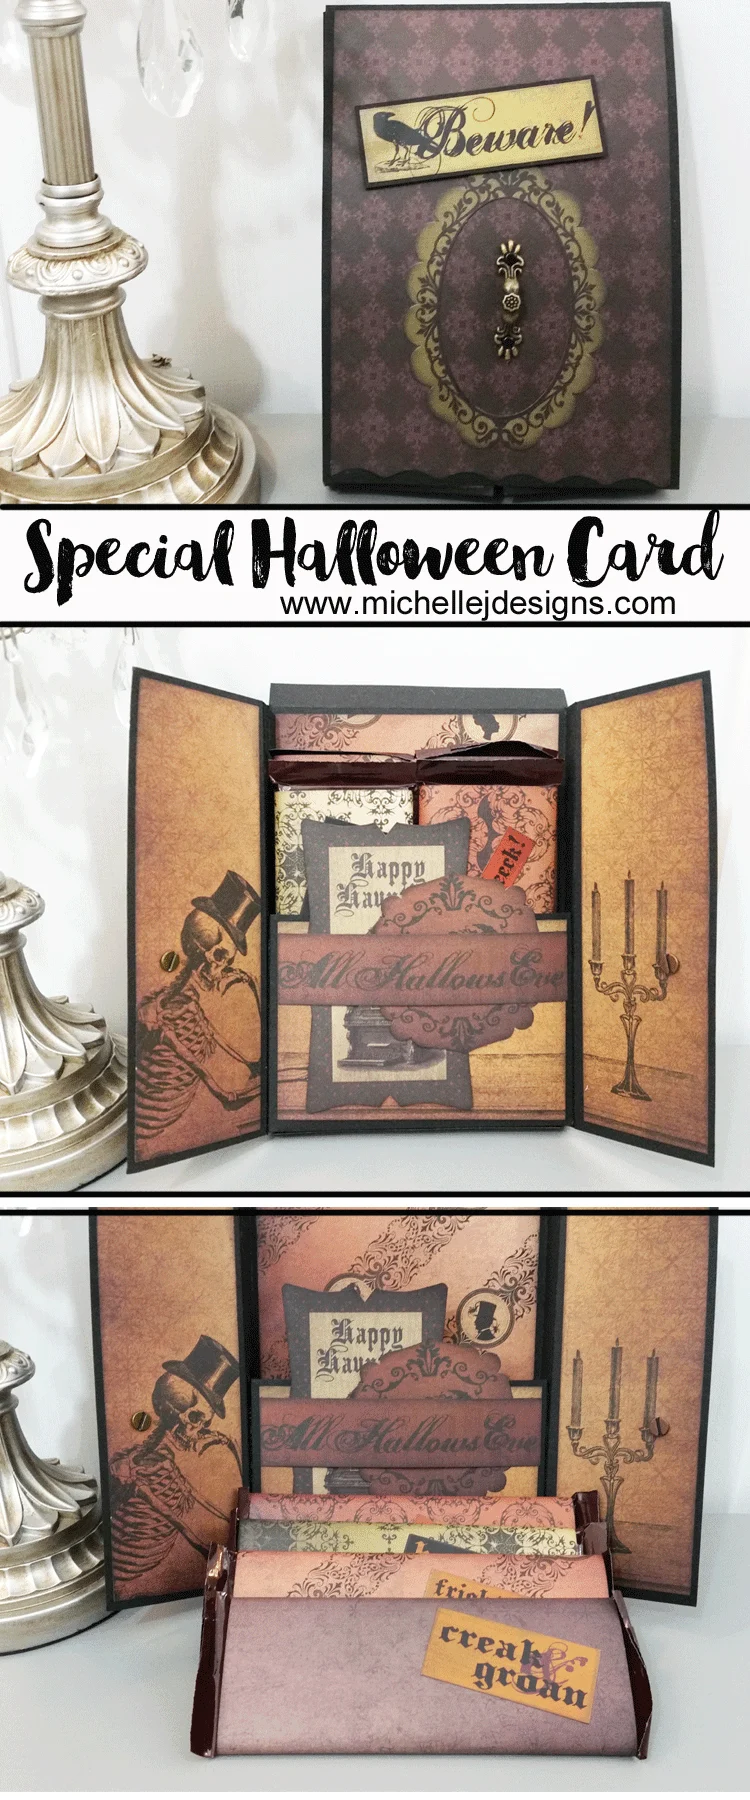 Halloween Card Gift - www.michellejdesigns.com - I love this fun design and it truly makes this Halloween Card into a gift.